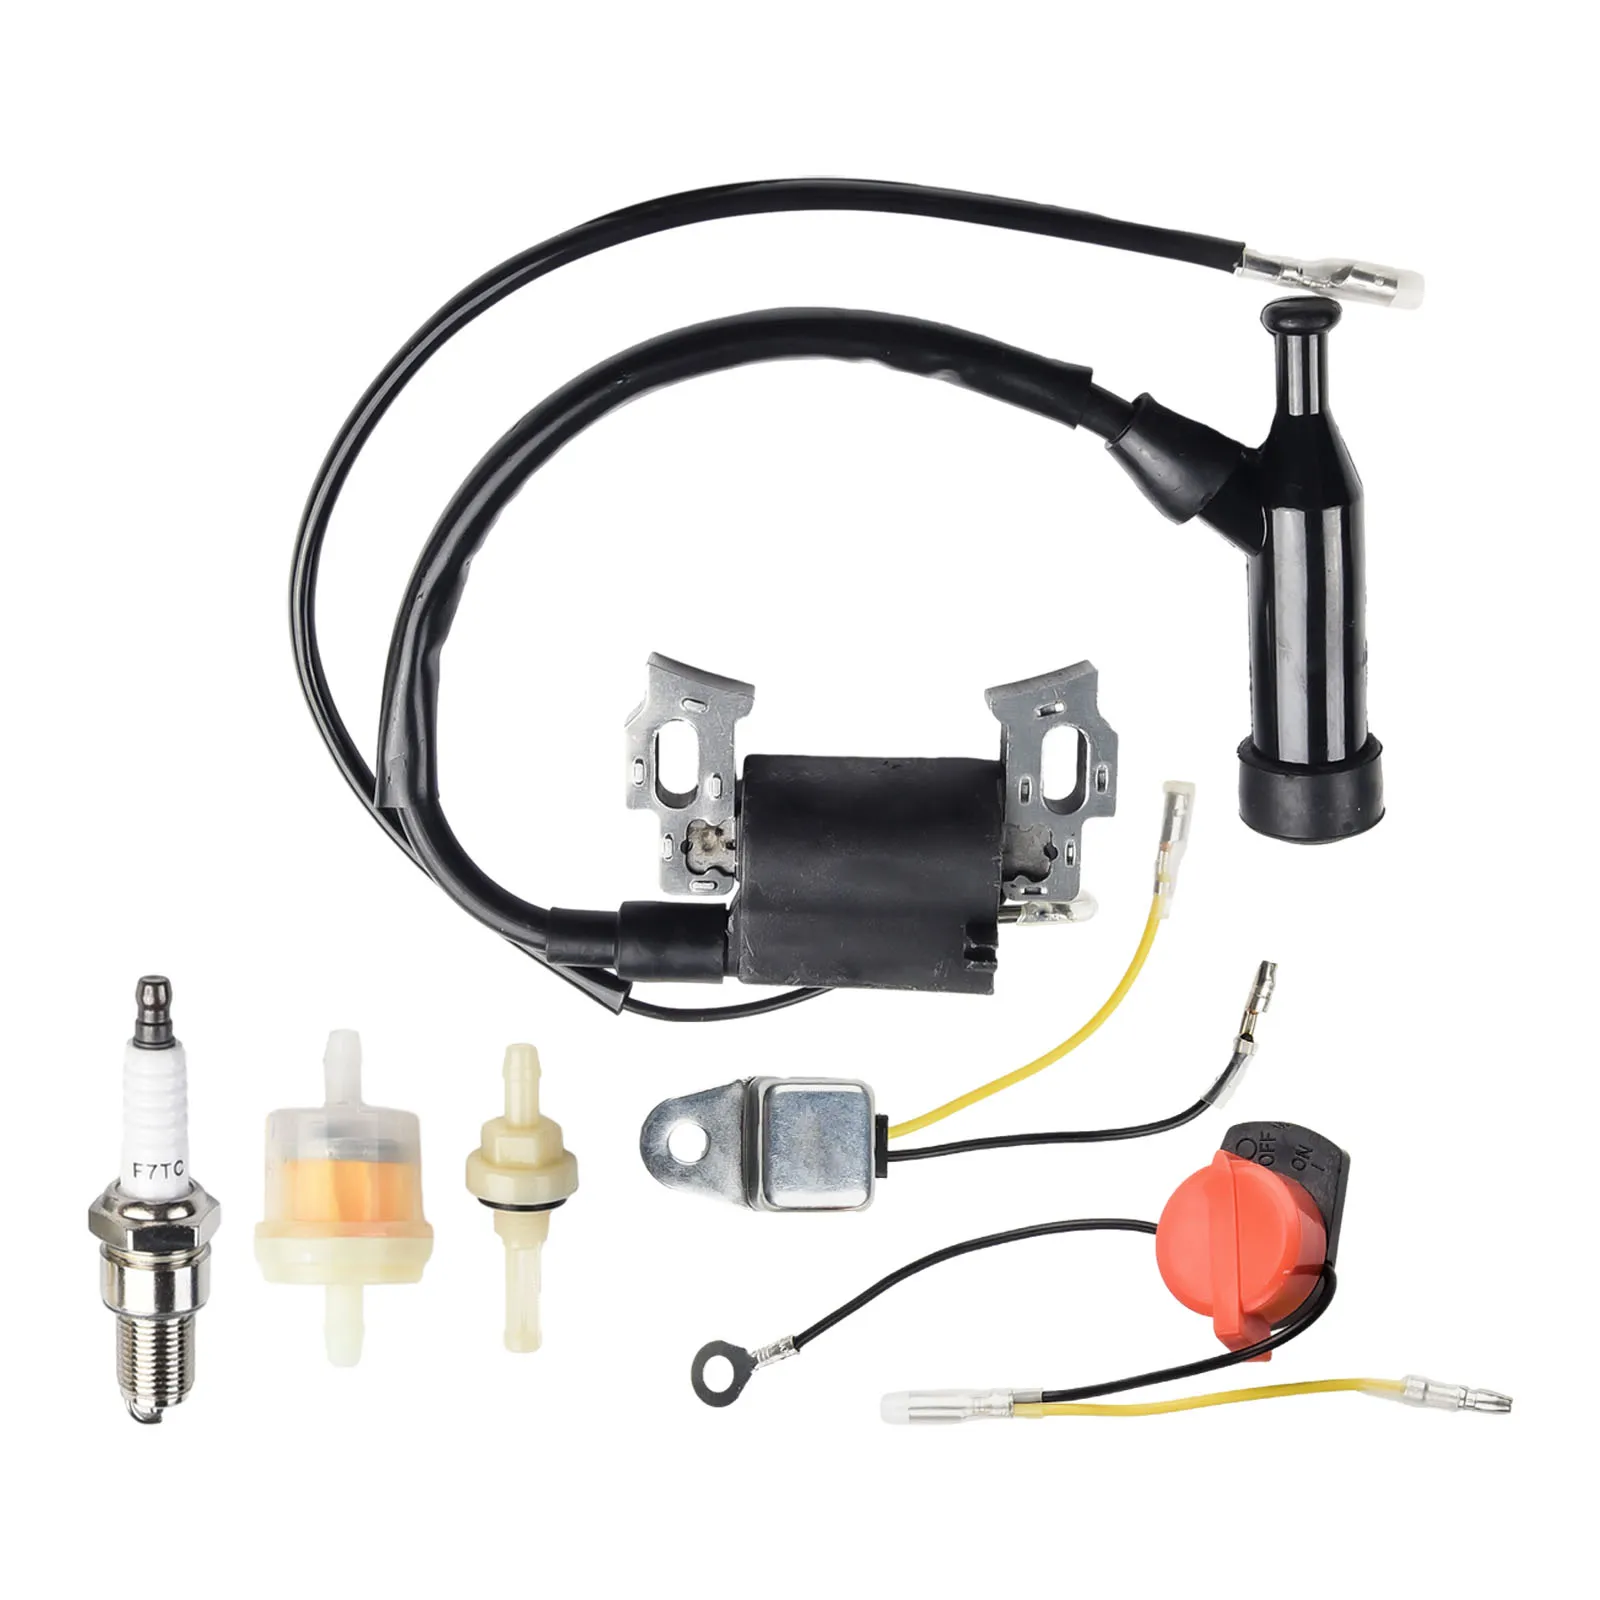 

Ignition Coil Magneto Kit For Honda GX200 GX120 GX110 GX140 GX160 5.5 For HP 6.5 For HP Garden Power Tools Replacement Parts